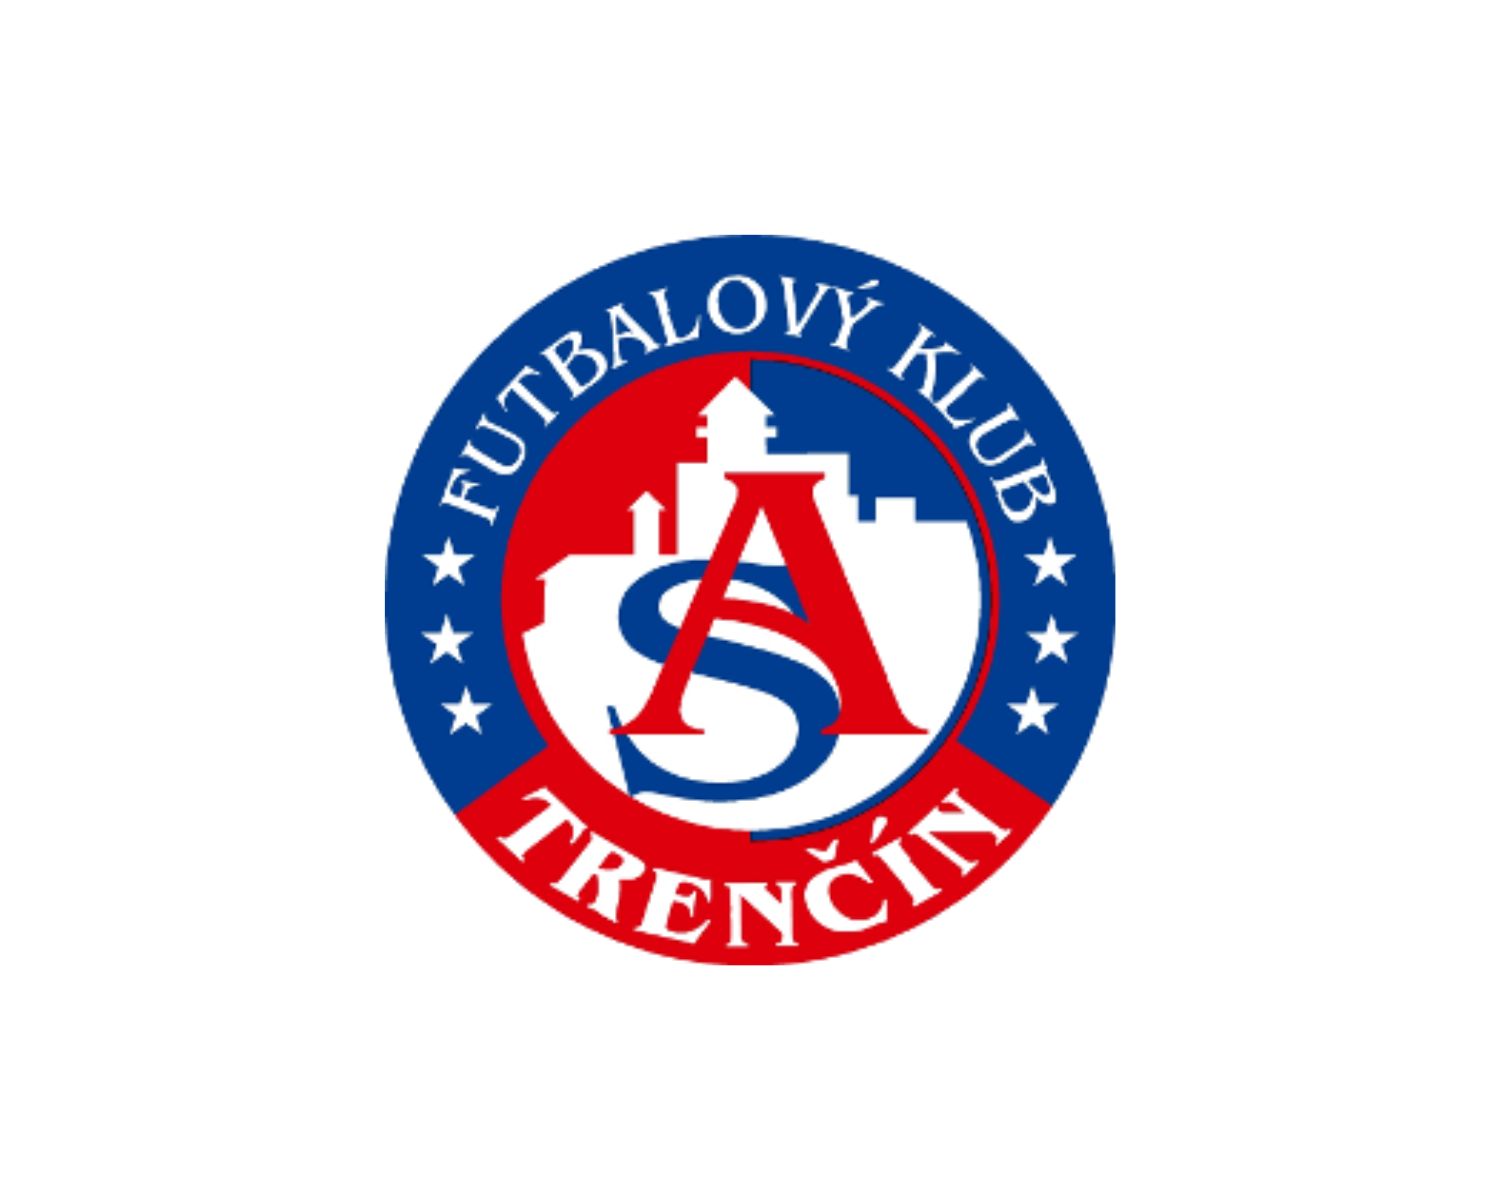 fk-as-trencin-12-football-club-facts